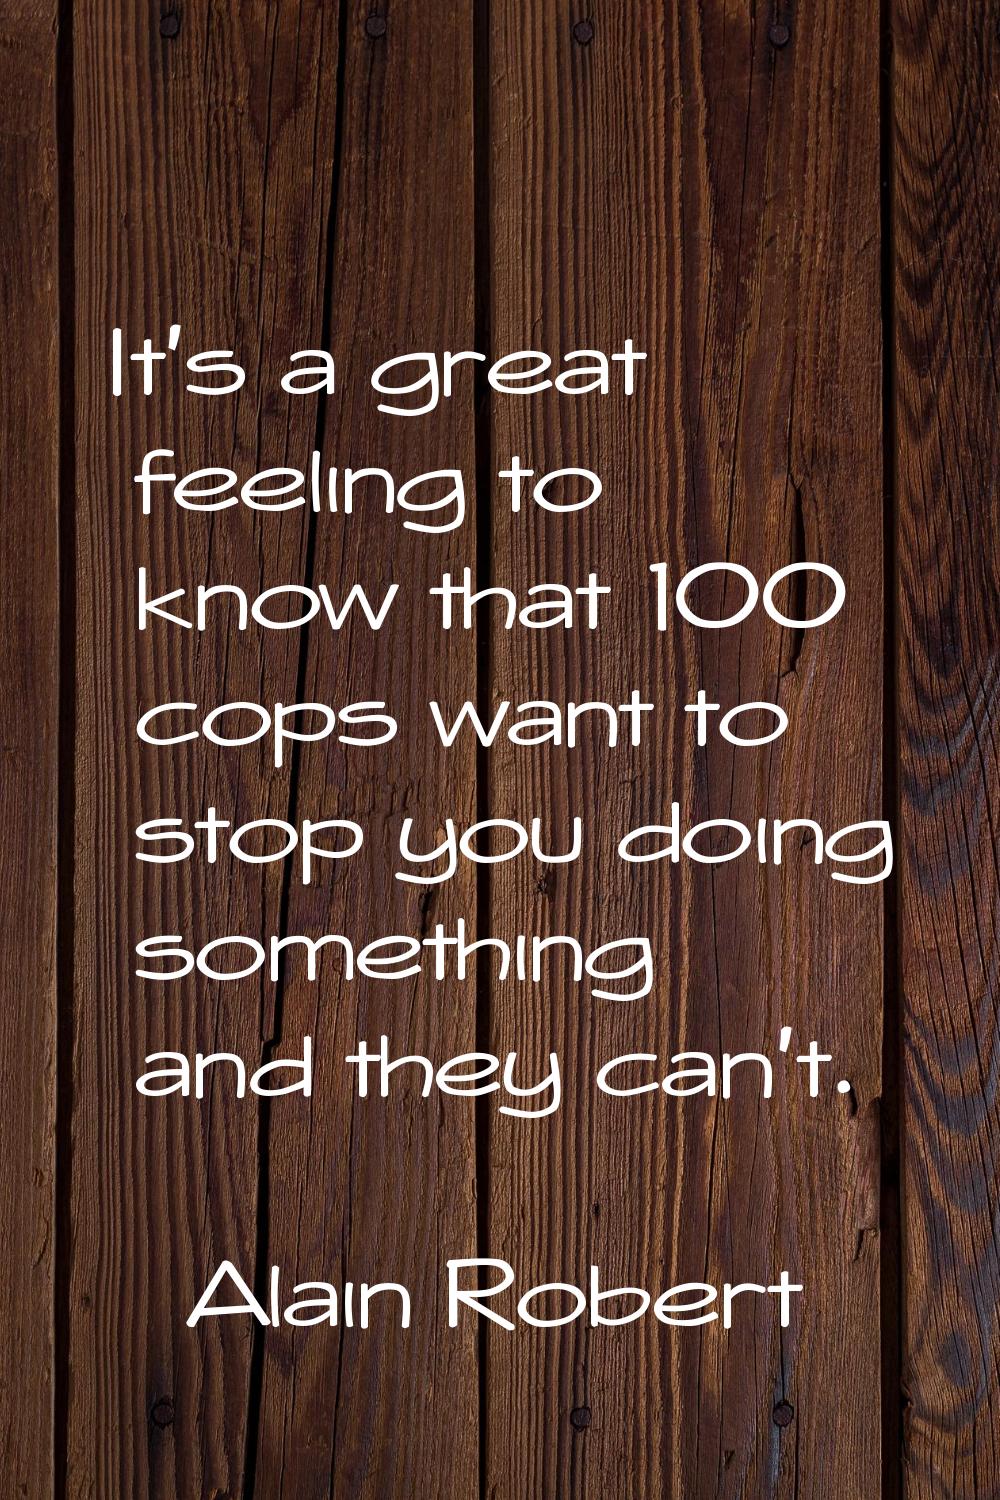 It's a great feeling to know that 100 cops want to stop you doing something and they can't.